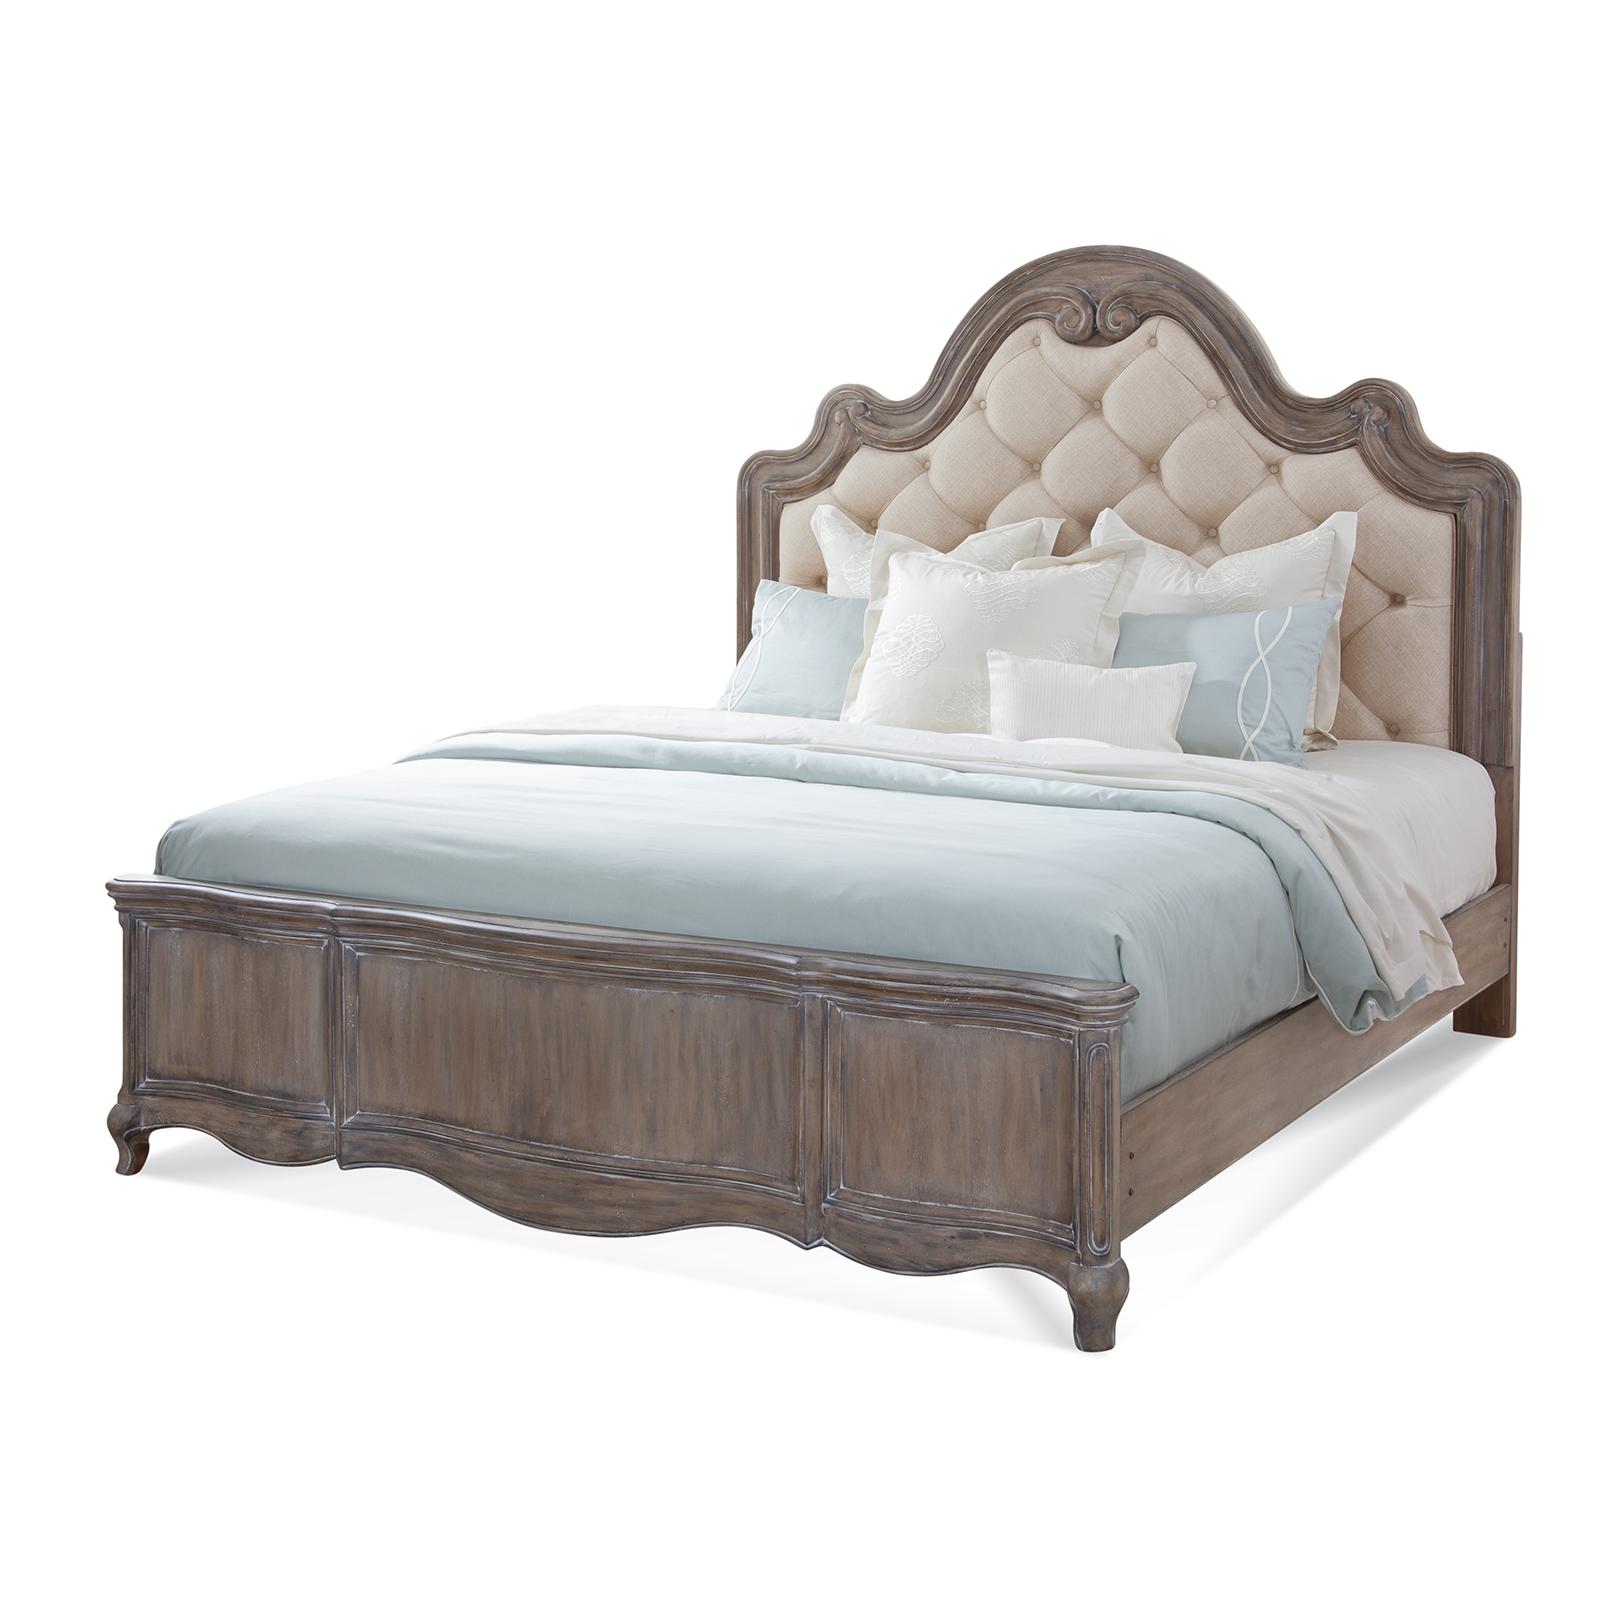 Classic, Traditional Panel Bed GENOA 1575-66TUPH 1575-66TUPH in Antique, Gray Fabric